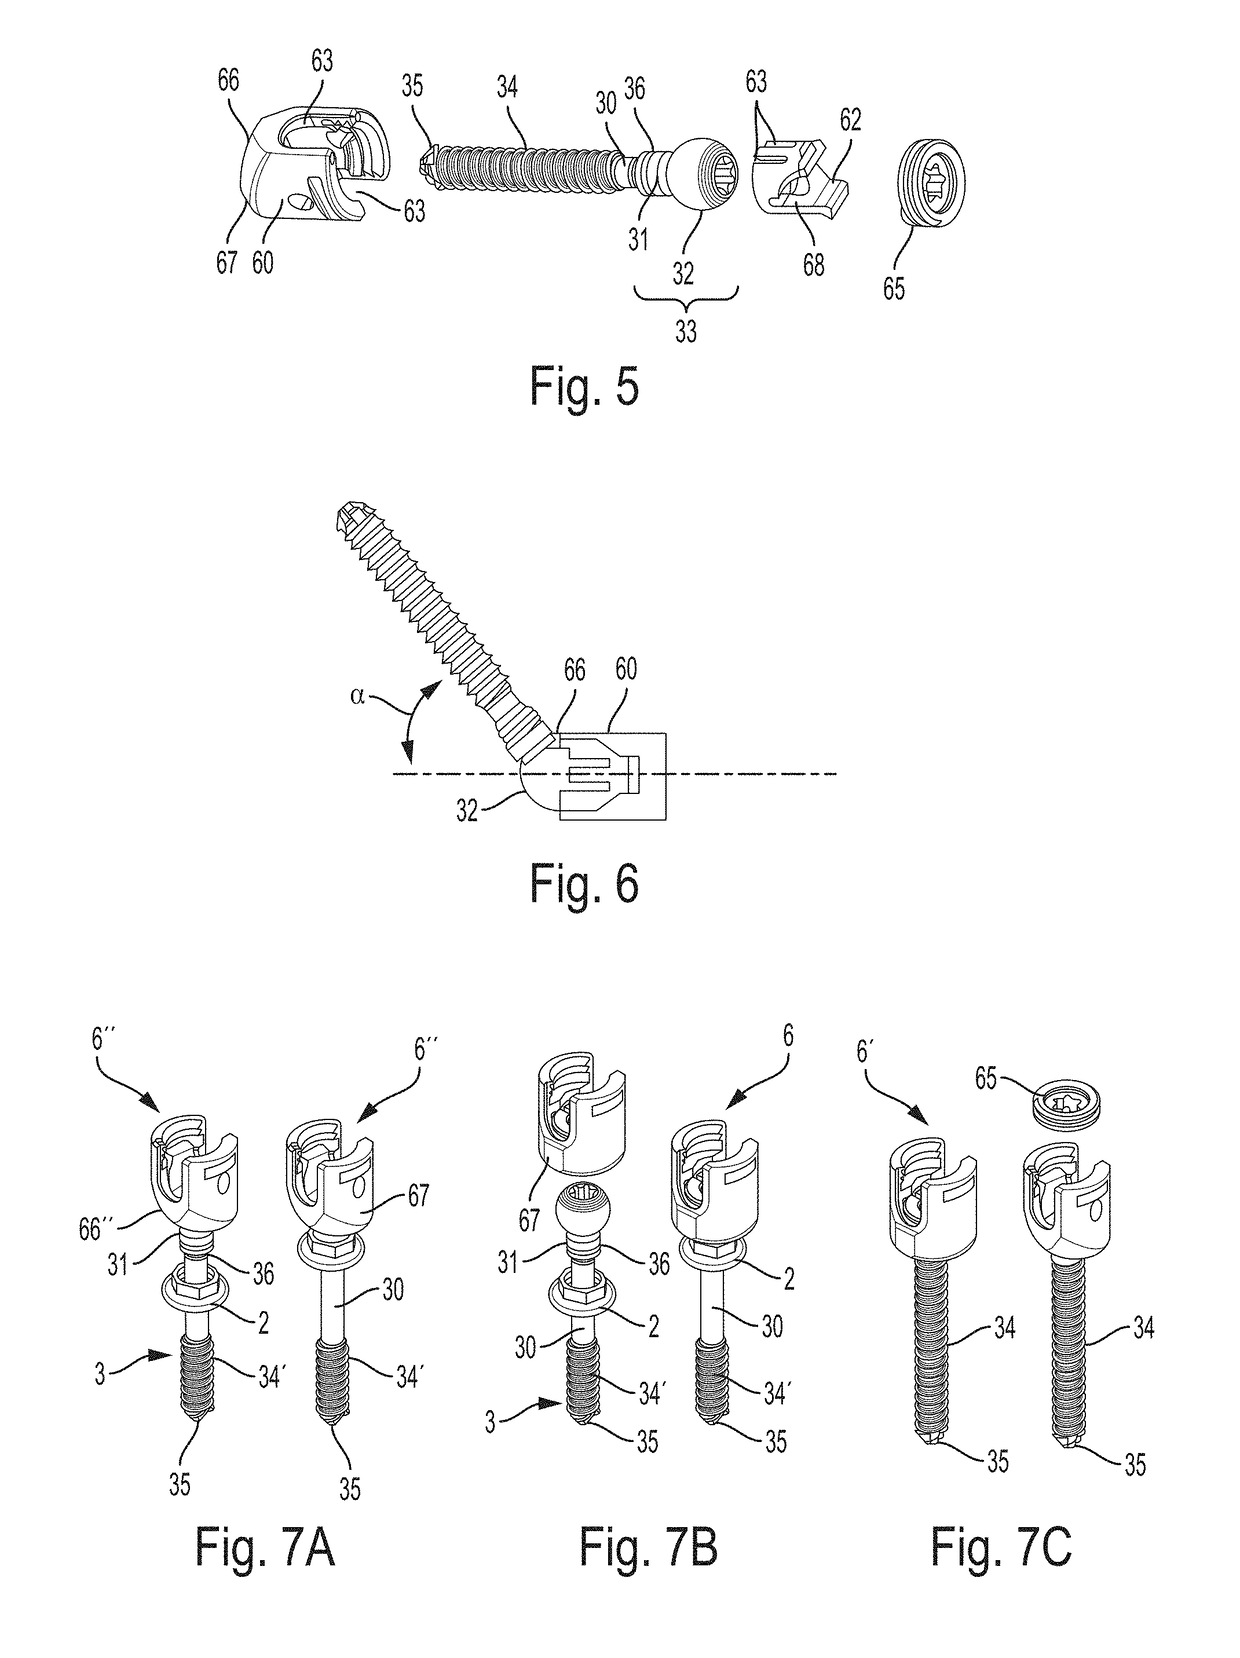 Spinal multi-level intersegmental stabilization system and method for implanting